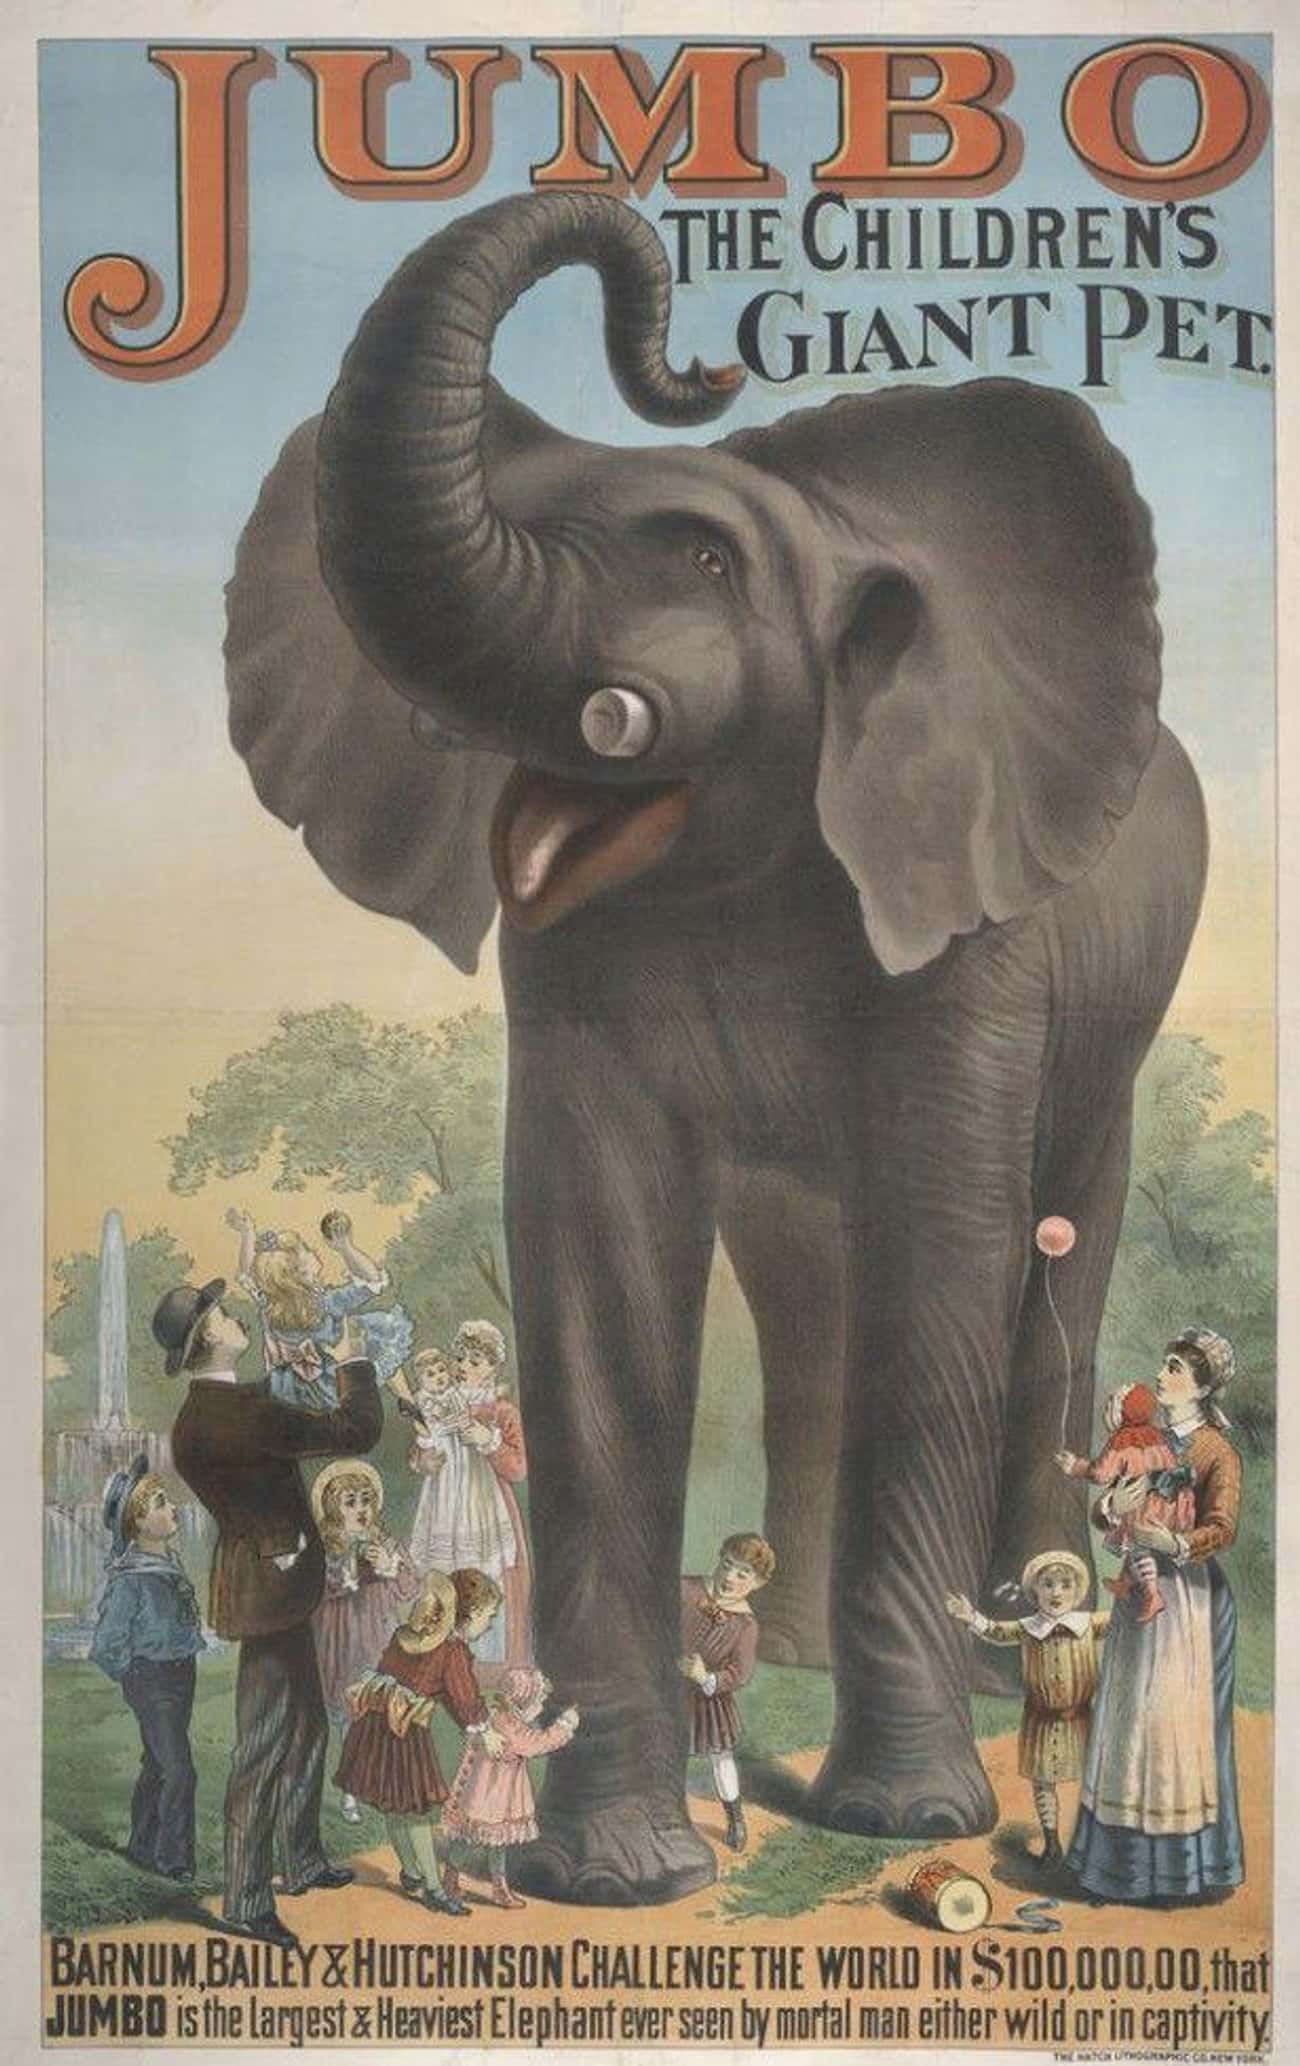 Weighing In At Seven Tons, Jumbo Lived Up To His Name